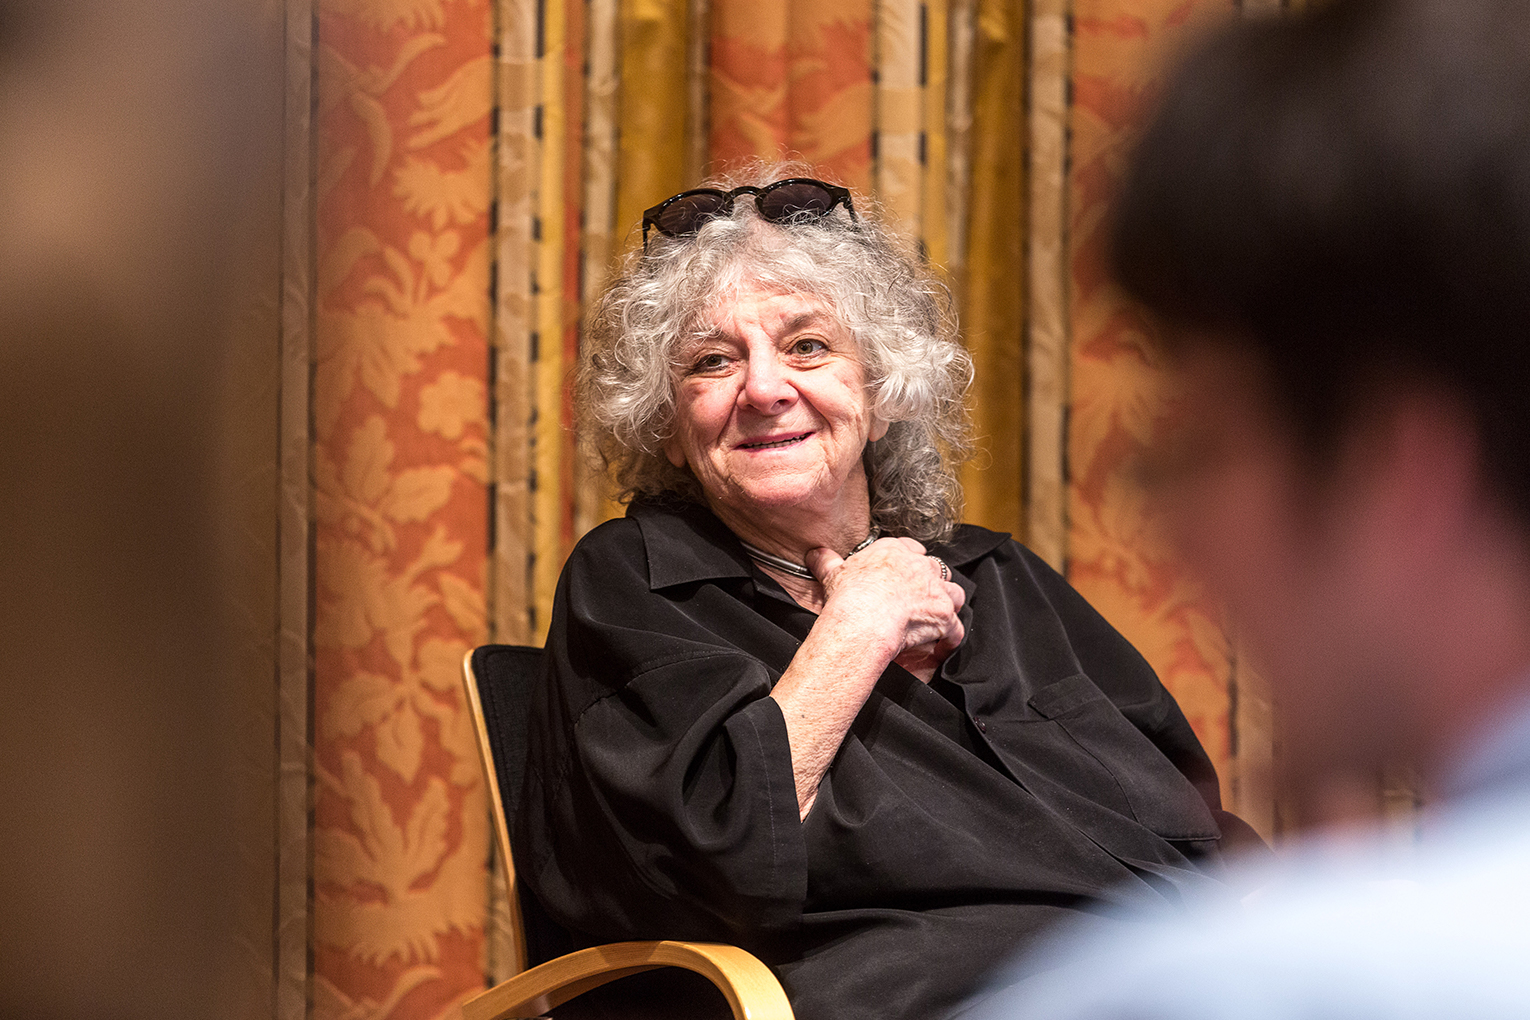 Ada Yonath in a black blouse and sunglasses in her hair listens to young scientists in Lindau